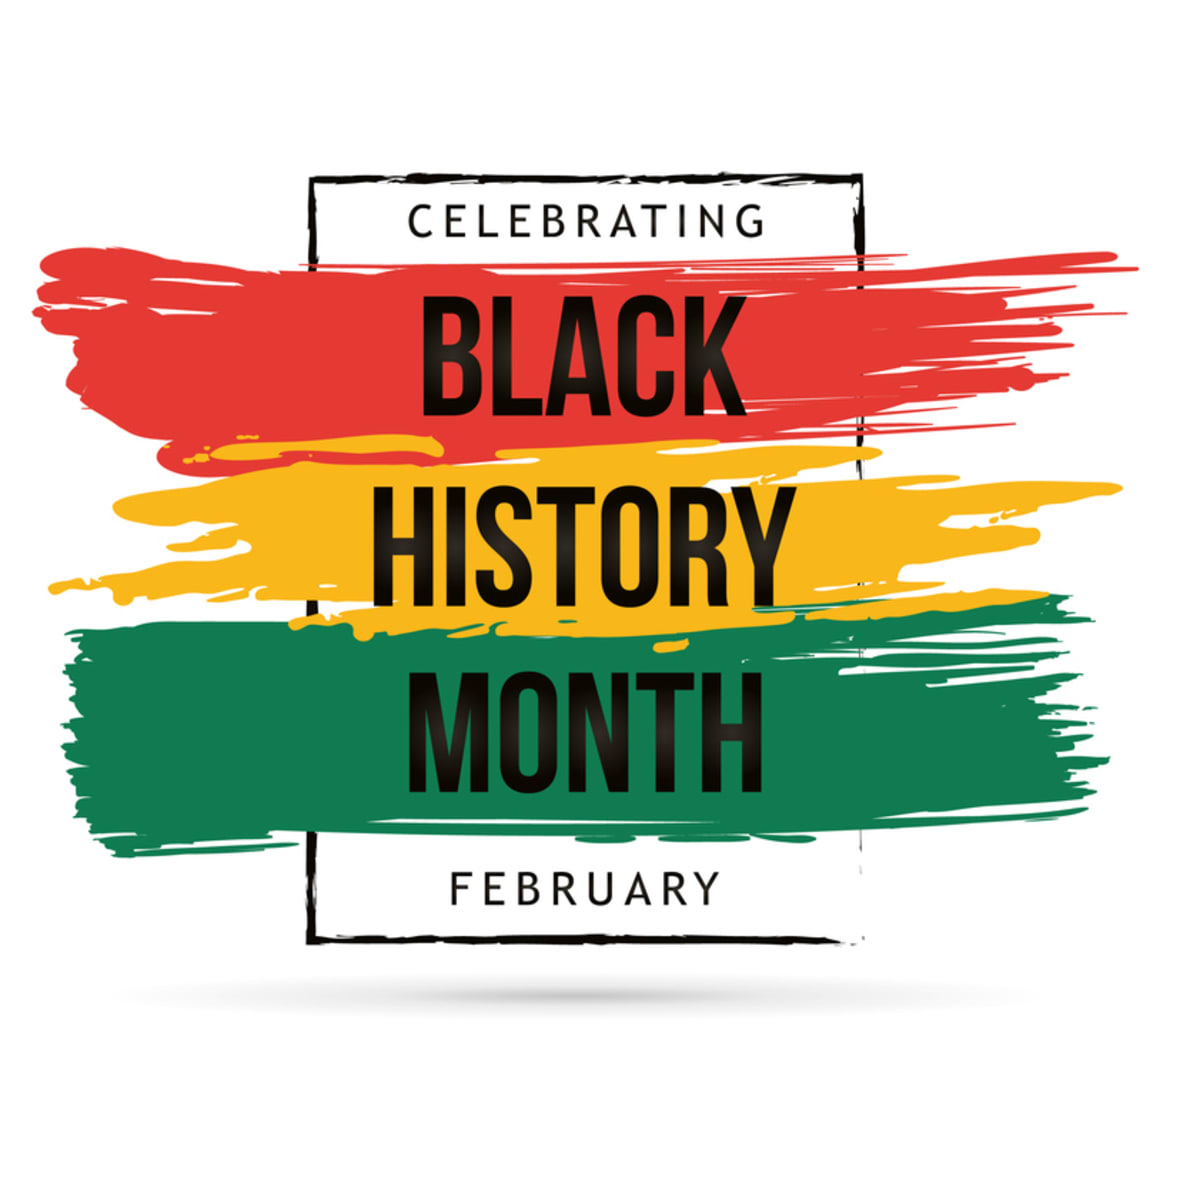 As we near the end of #BlackHistoryMonth, let's continue to recognize Blacks & work to break down barriers for all minorities, like access to #mentalhealth. By building awareness of mental health disparities, we can advocate for equity & create change with/in our communities.